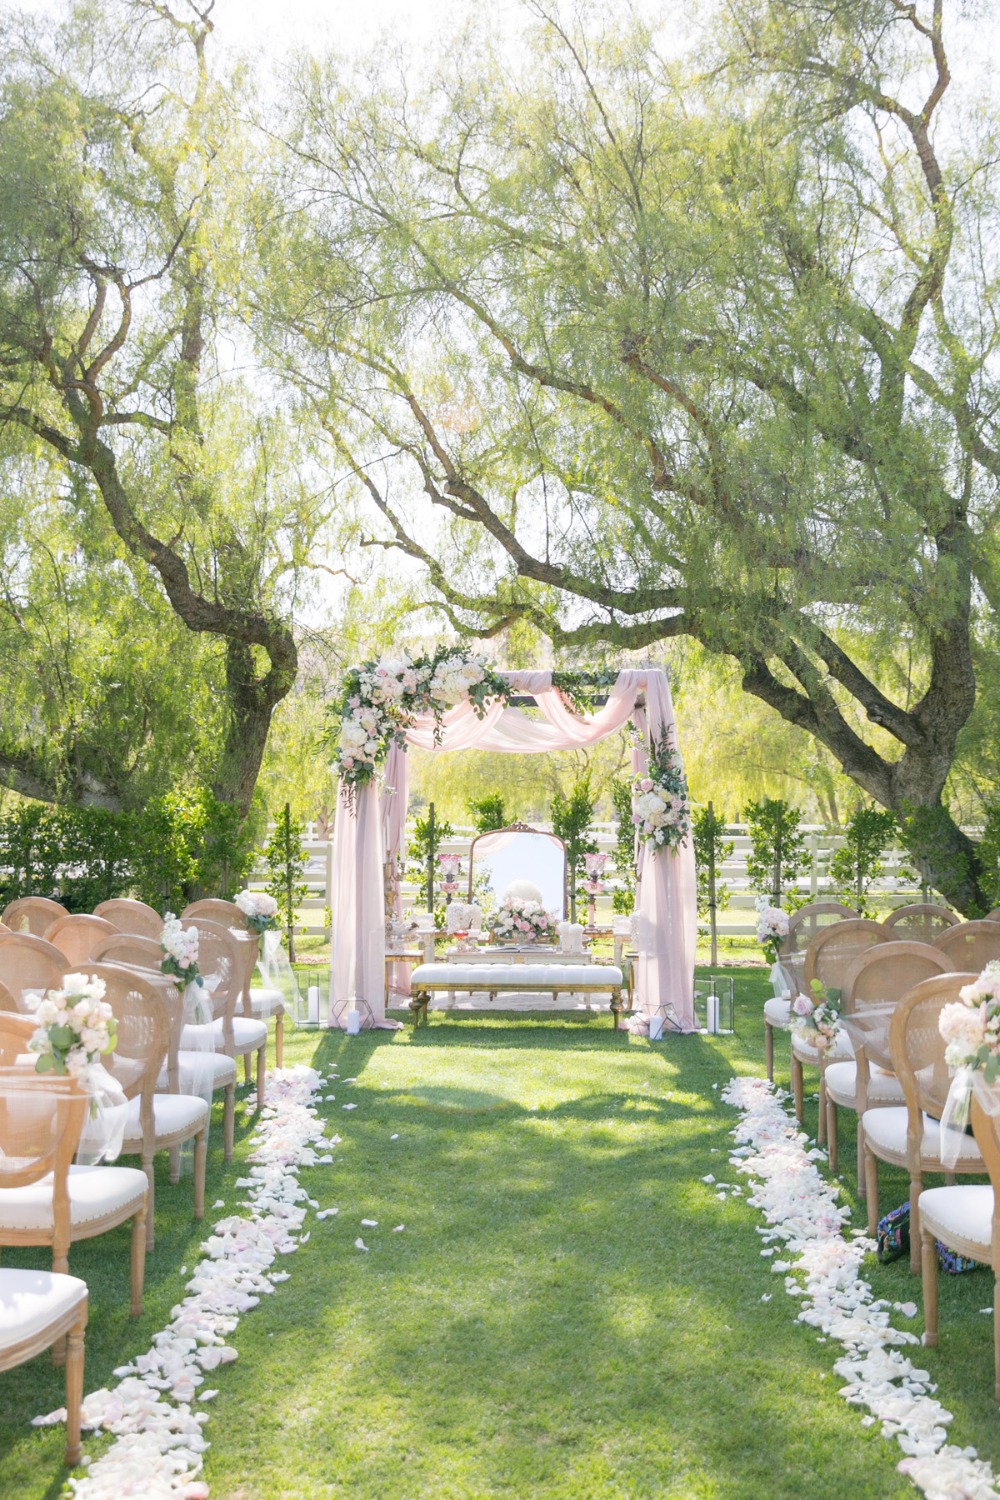 wedding ceremony decor in pink and white